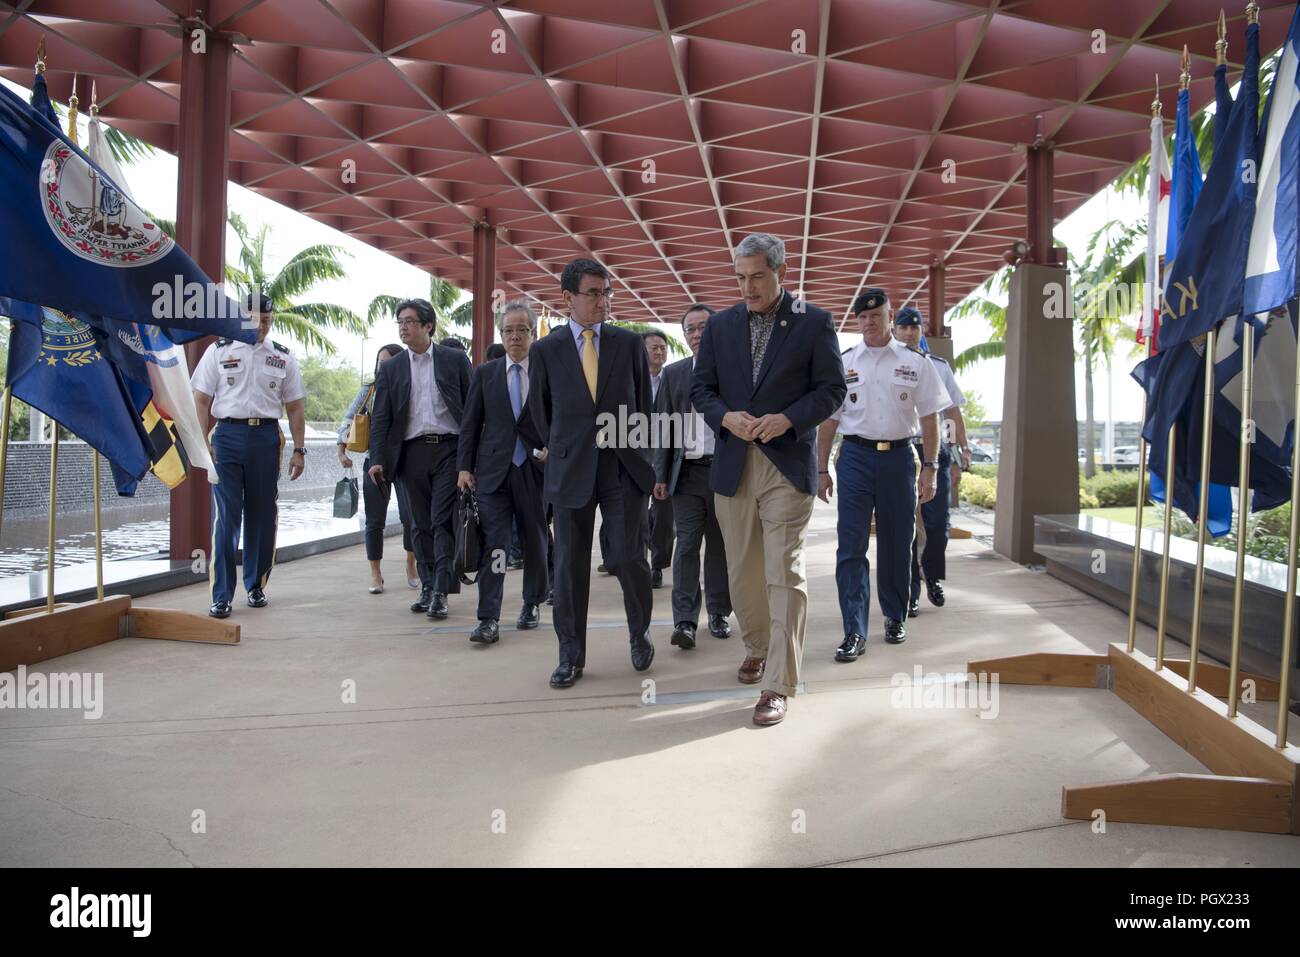 Foreign Minister of Japan Taro Kono, Consul General of Japan in Honolulu Koichi Ito and other delegates walking with Defense POW/MIA Accounting Agency director Kelly McKeague at Joint Base Pearl Harbor-Hickam, Hawaii, August 22, 2018. Image courtesy Tech. Sgt. Kathrine Dodd / Defense POW/MIA Accounting Agency. () Stock Photo